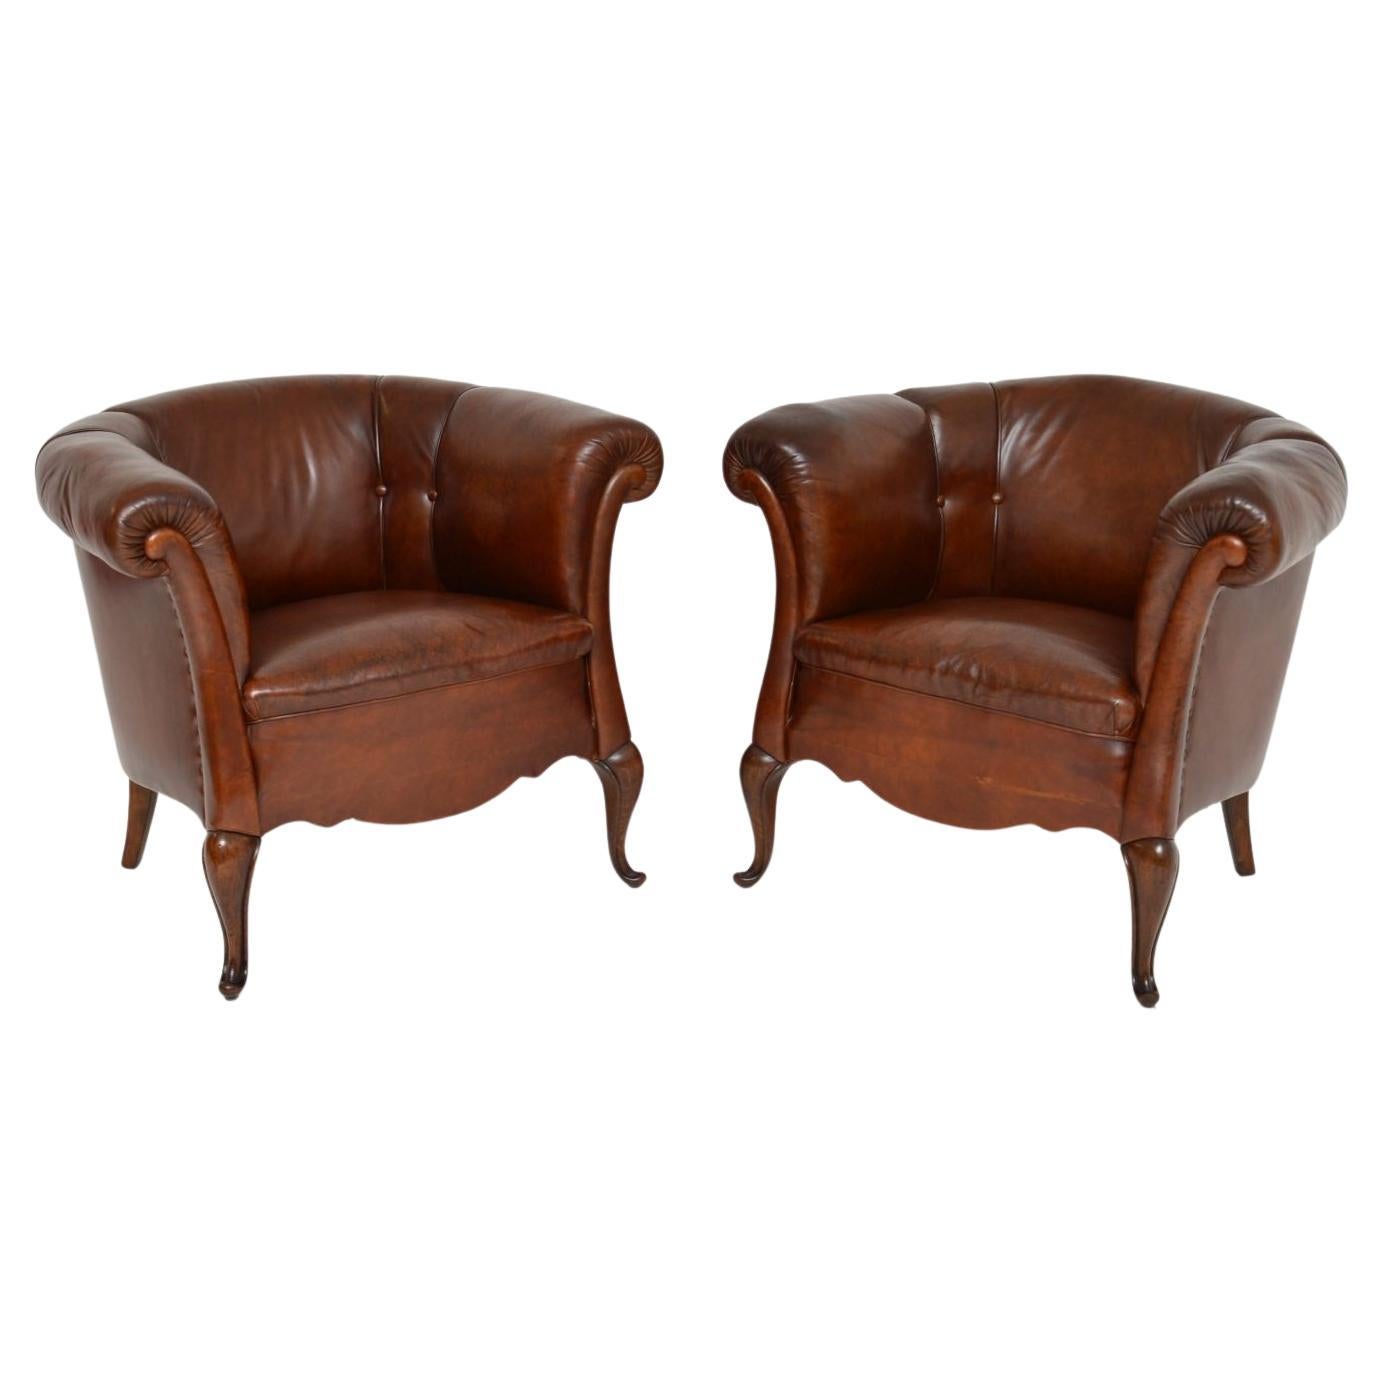 Pair of Antique Swedish Leather Club Armchairs